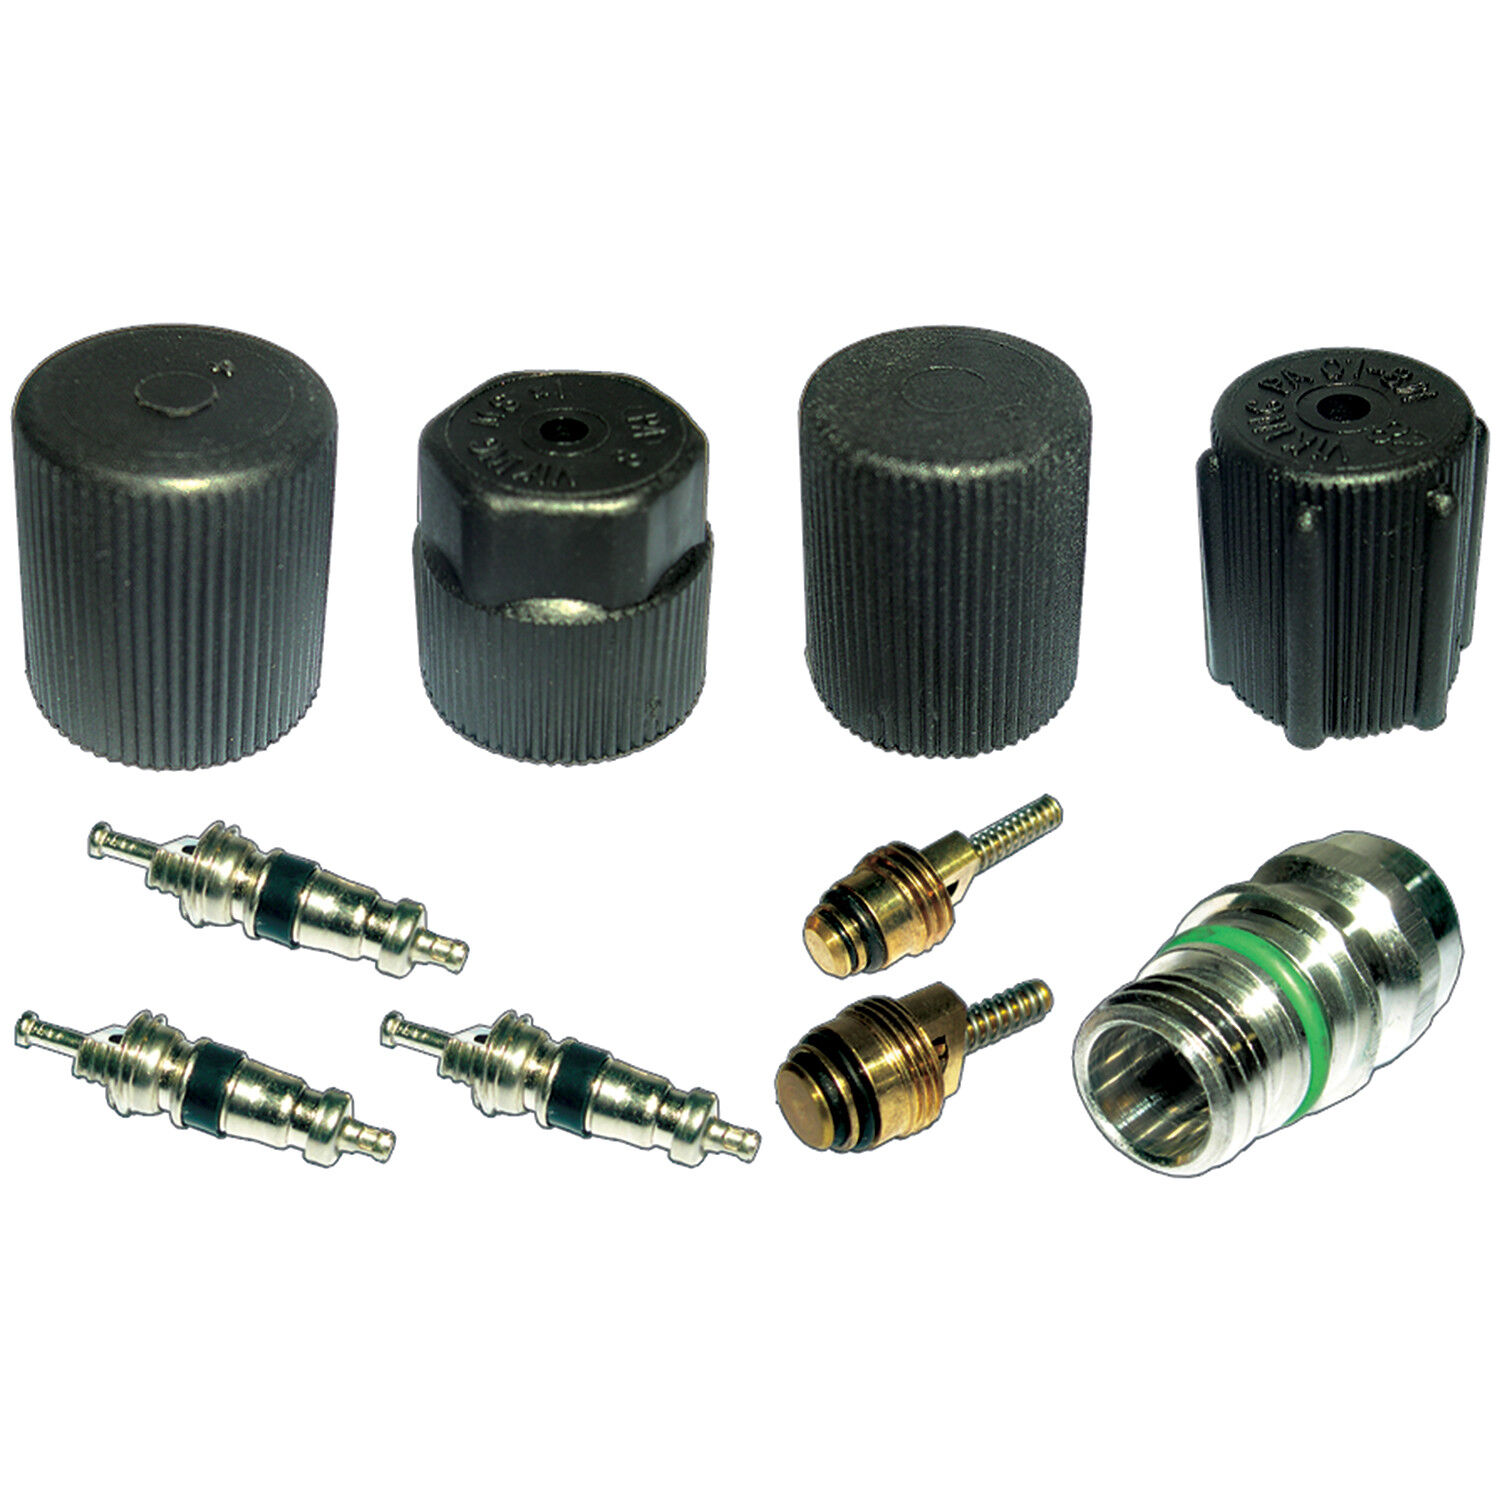  A/C System Valve Core and Cap Kit MT2908